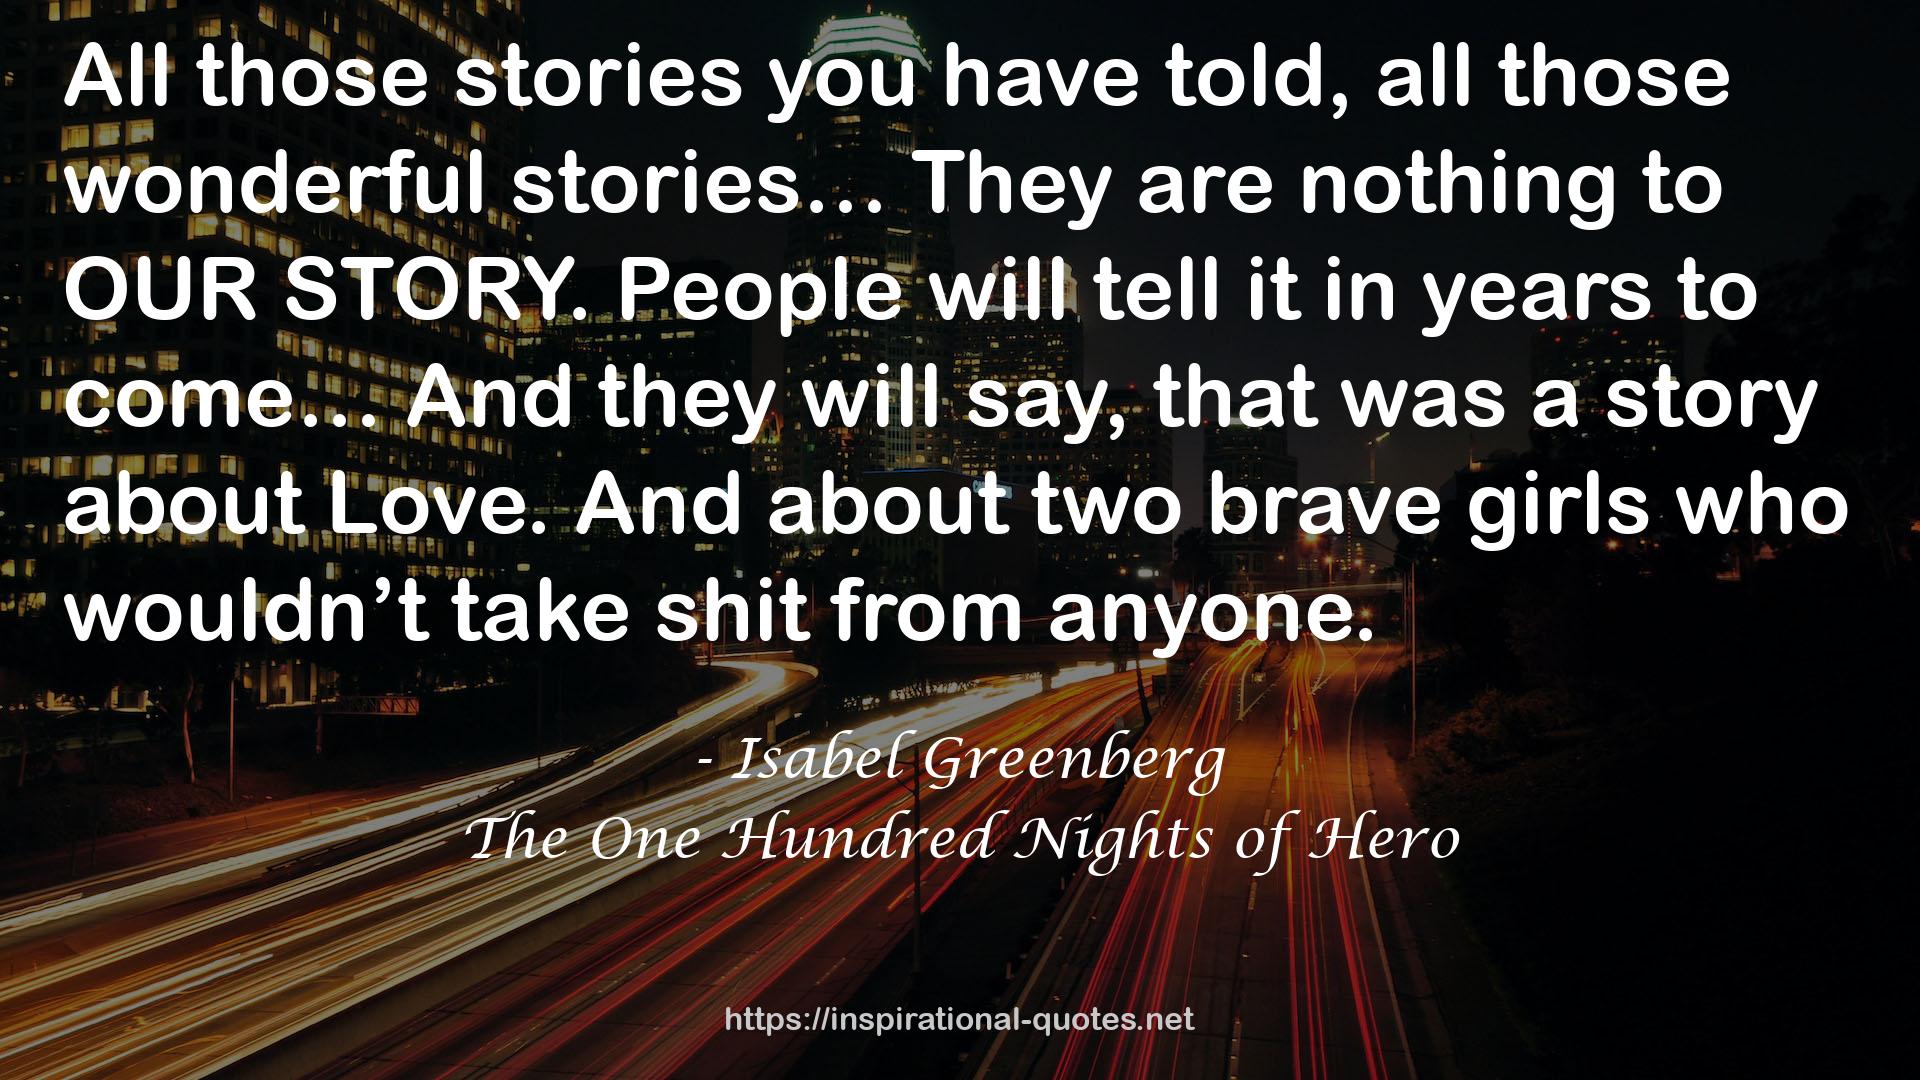 The One Hundred Nights of Hero QUOTES